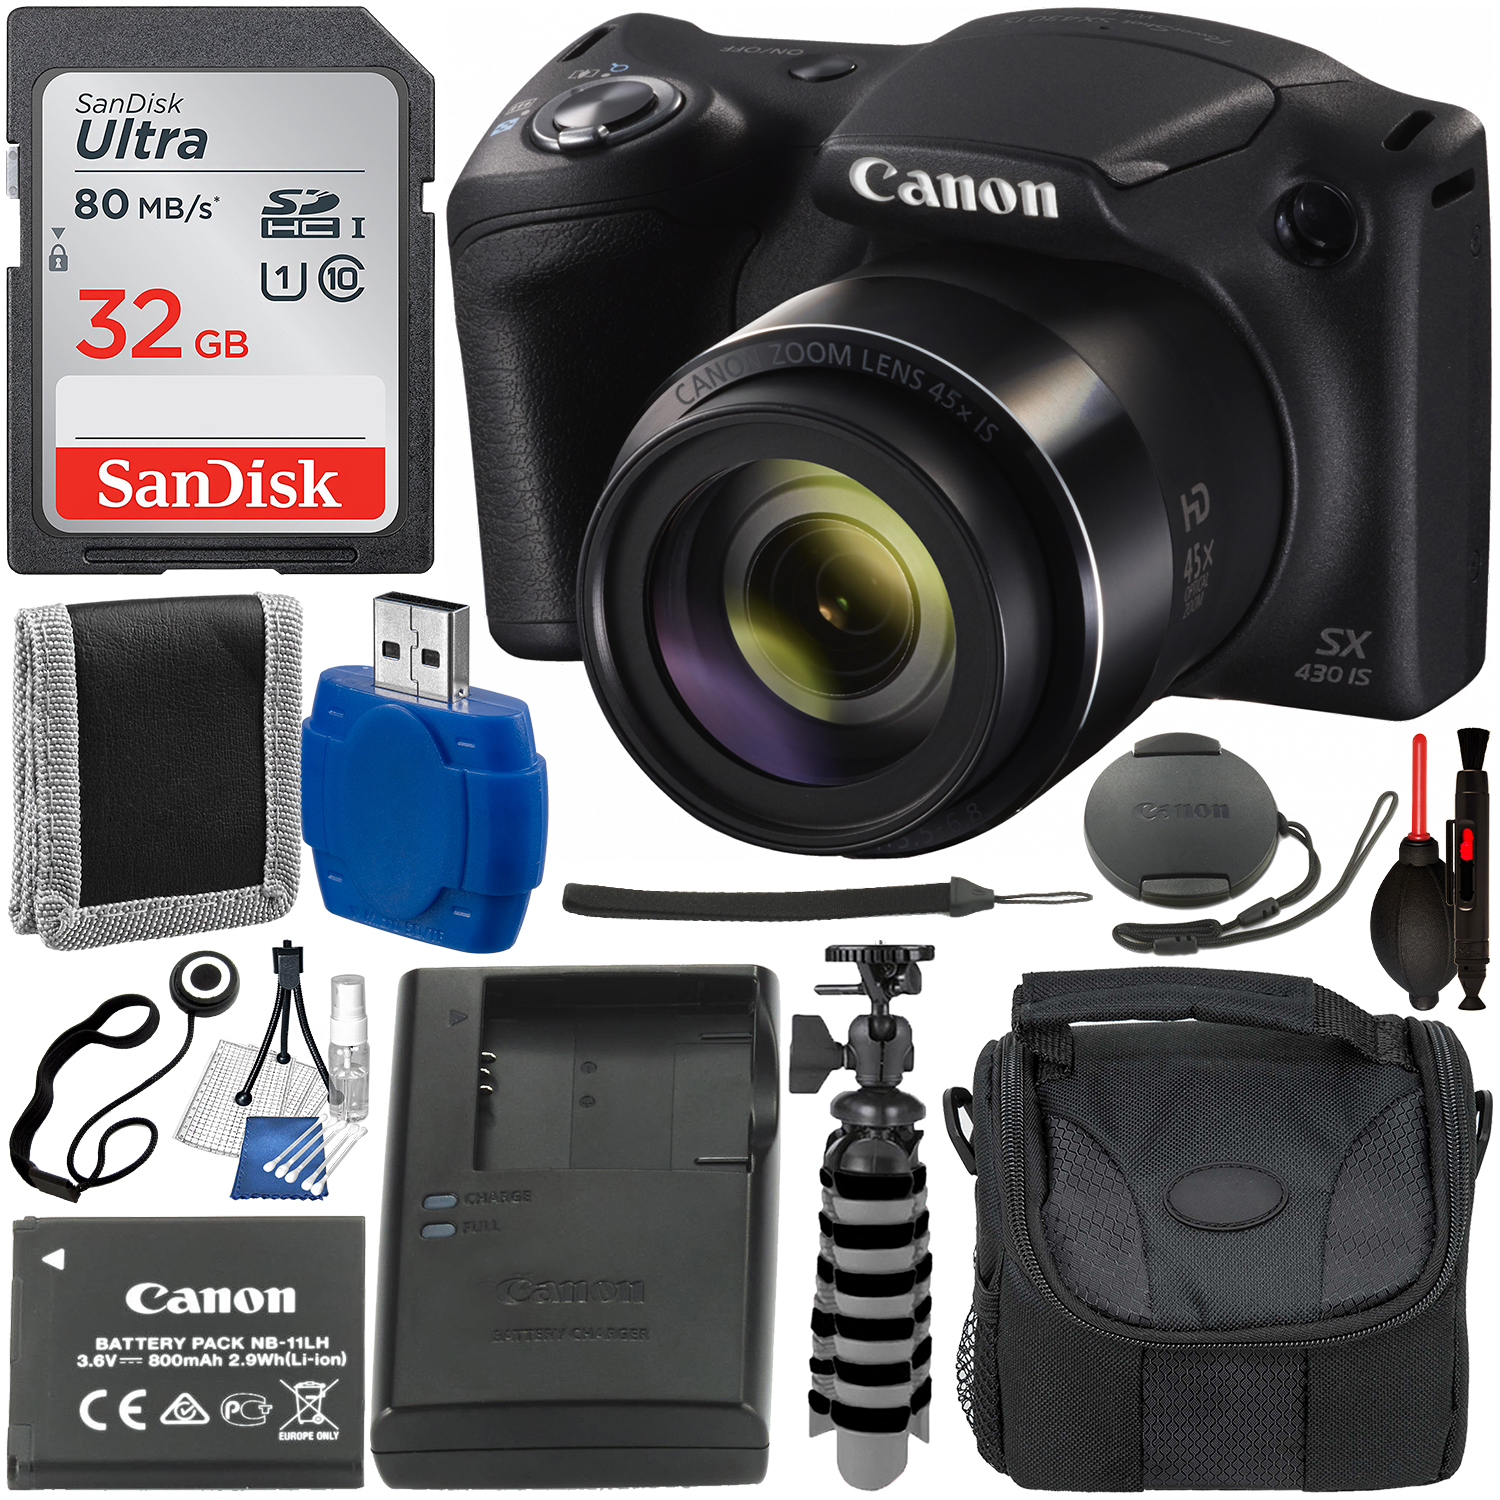 Canon PowerShot SX430 IS Digital Camera With Essential Accessory Bundle